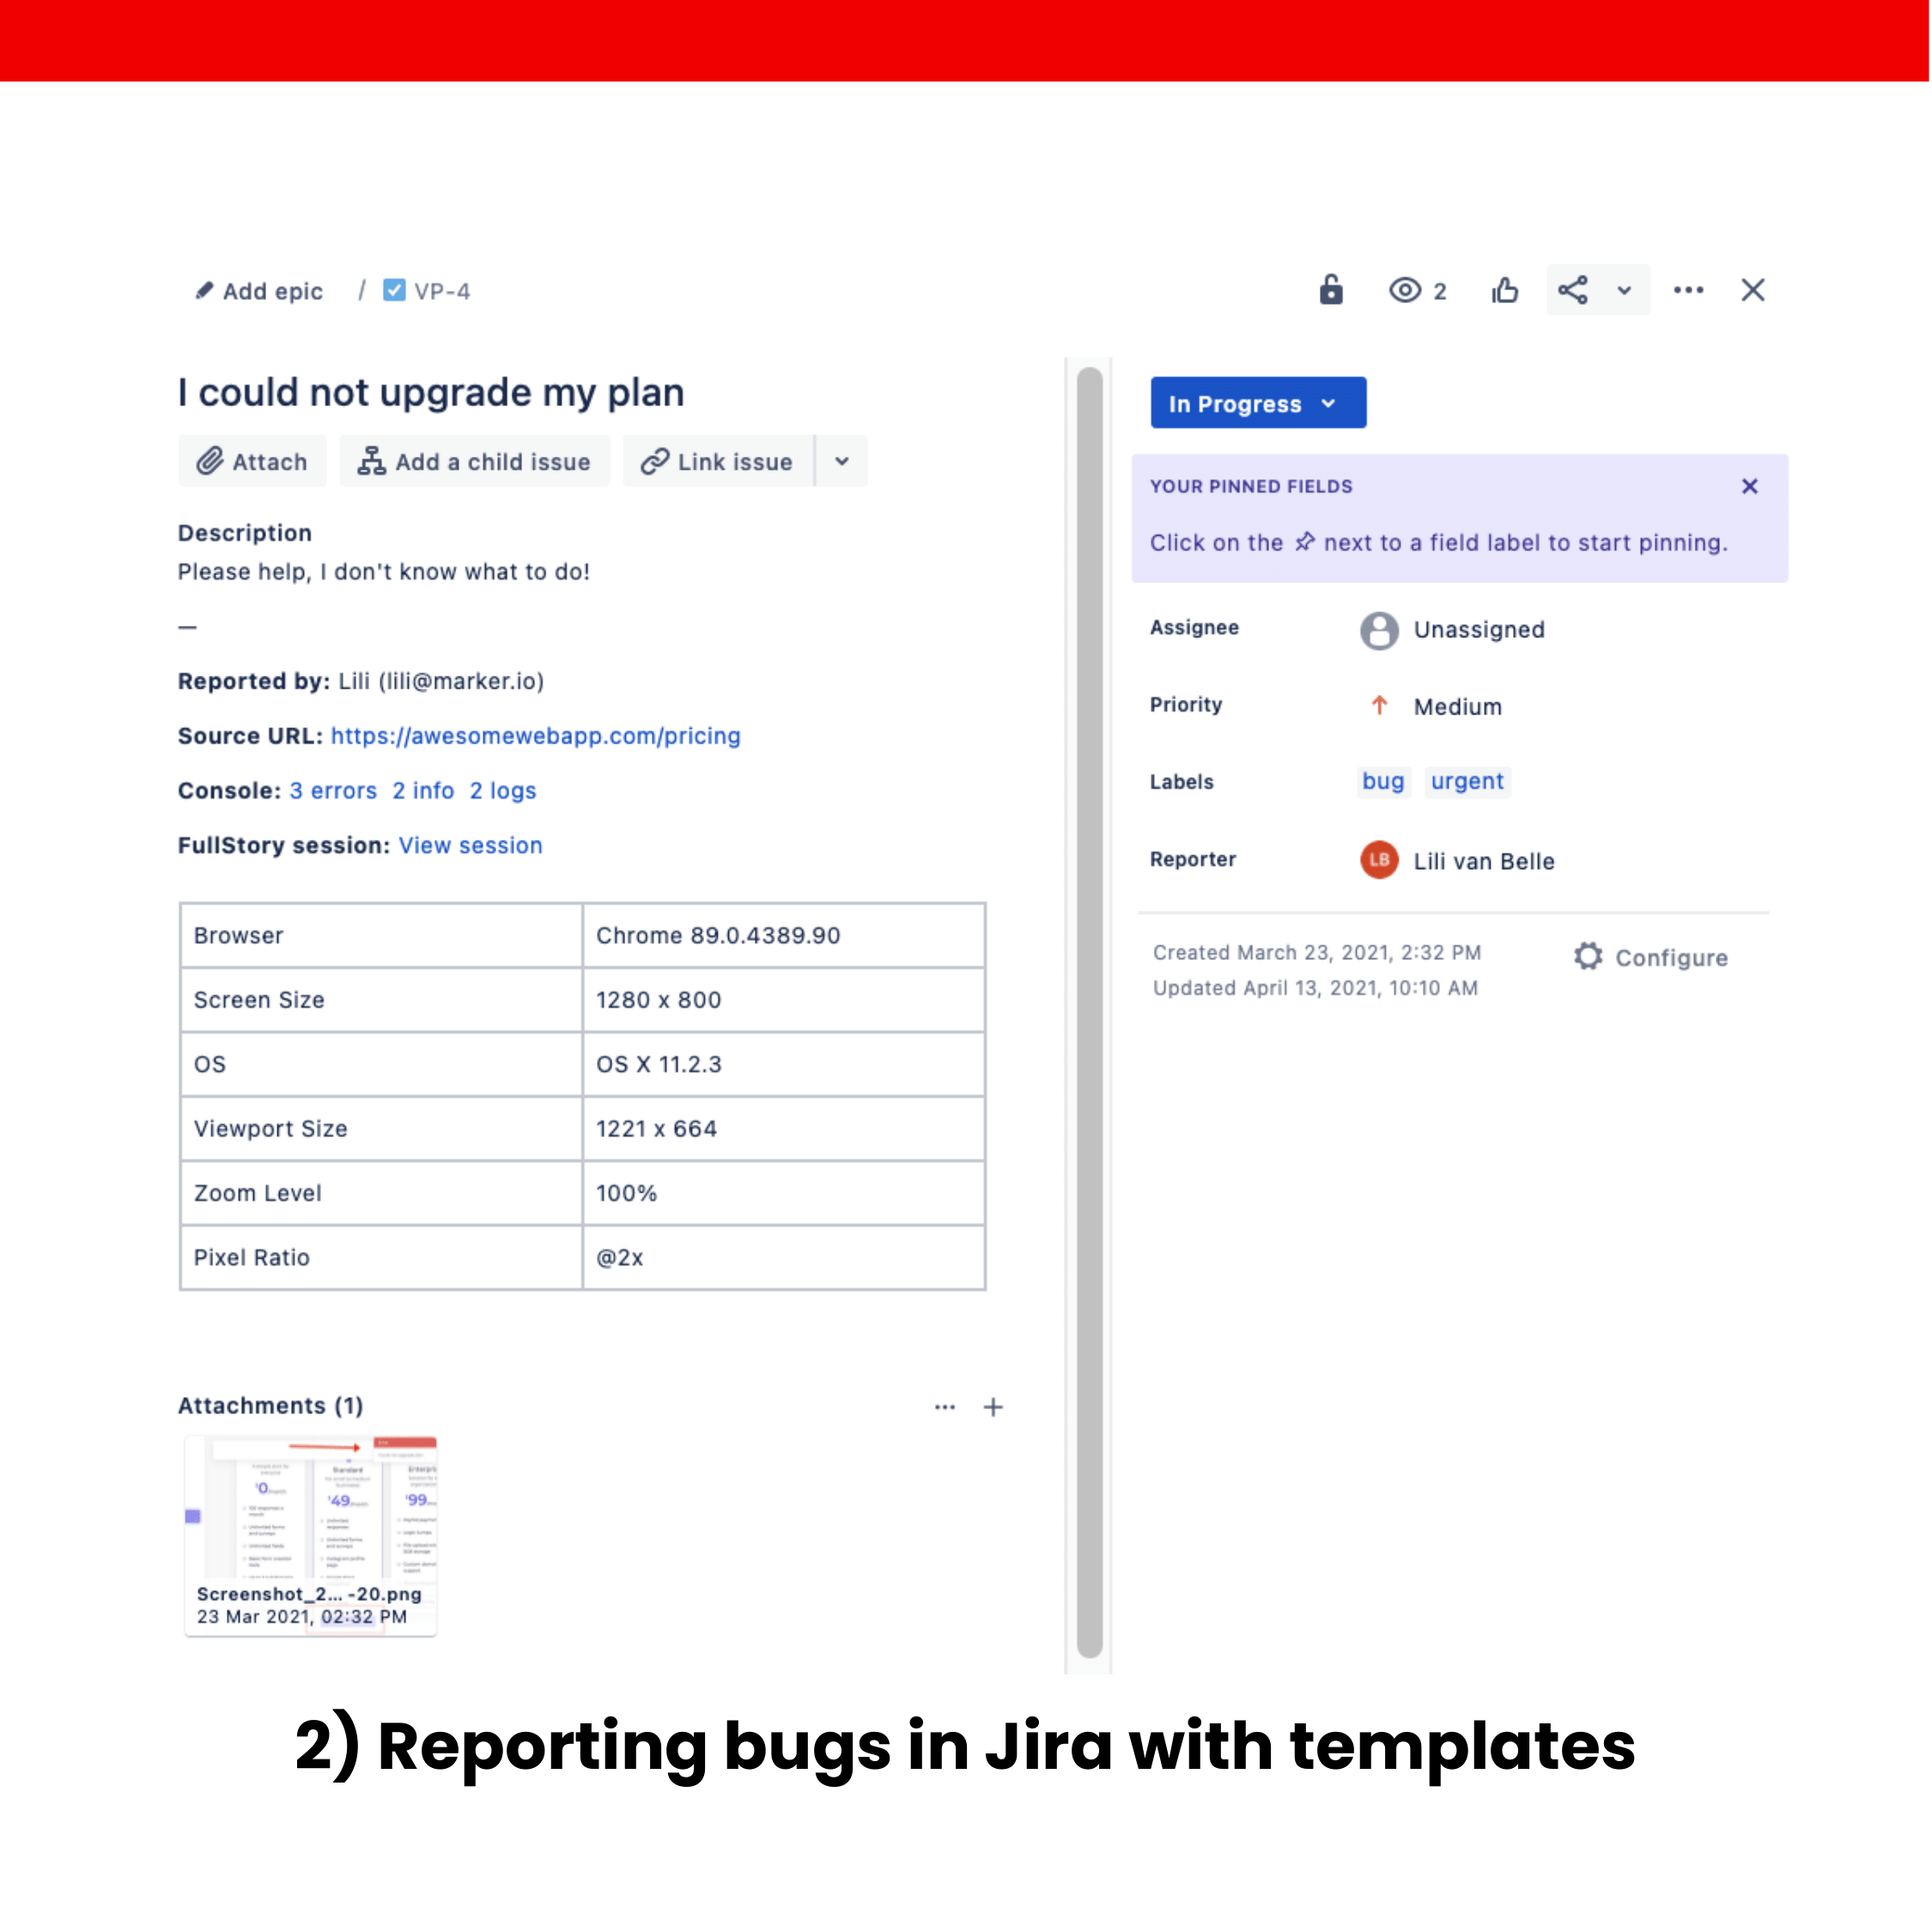 2) Reporting bugs in Jira with templates